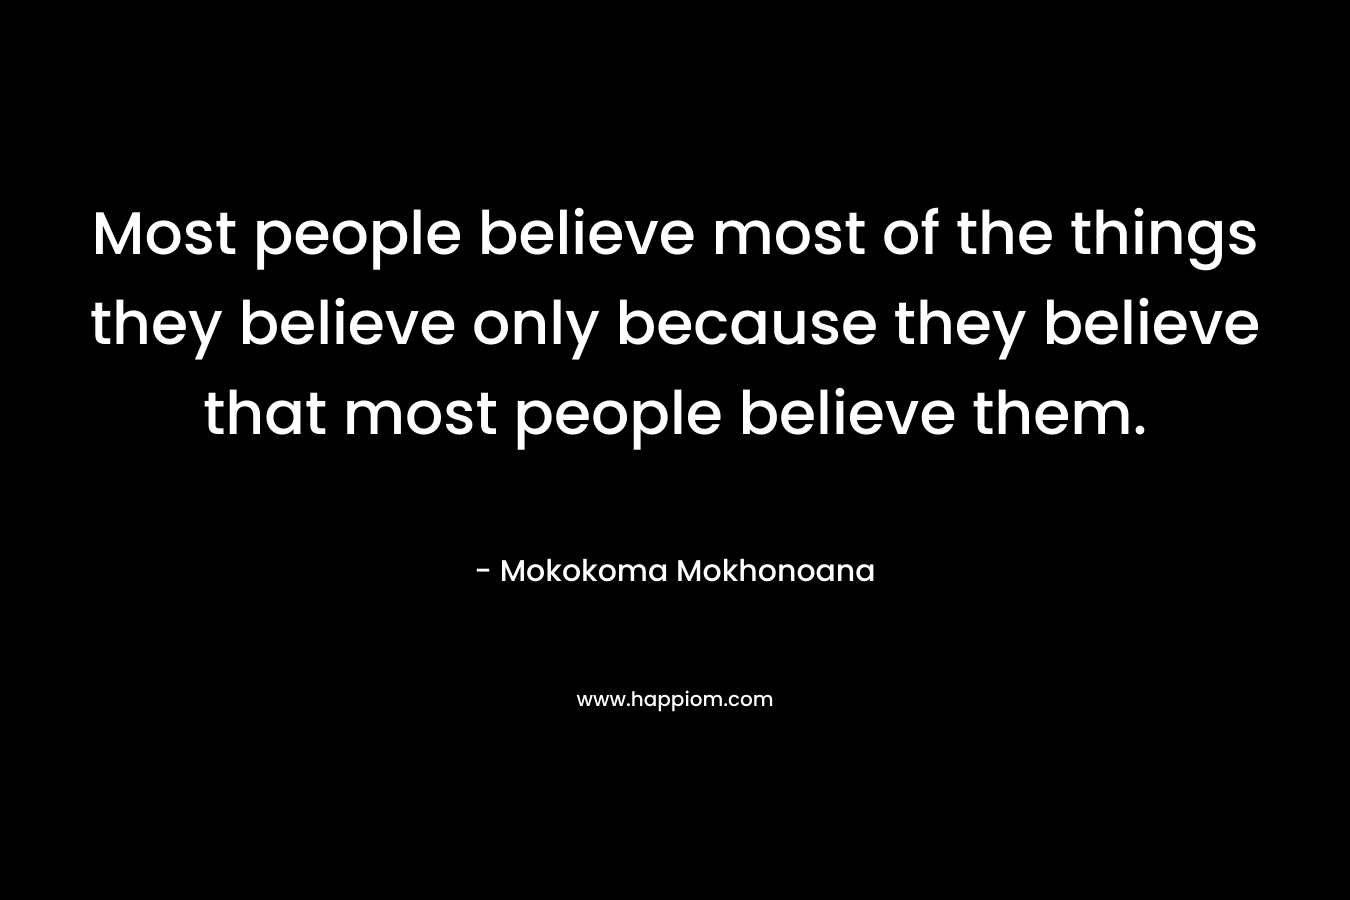 Most people believe most of the things they believe only because they believe that most people believe them.